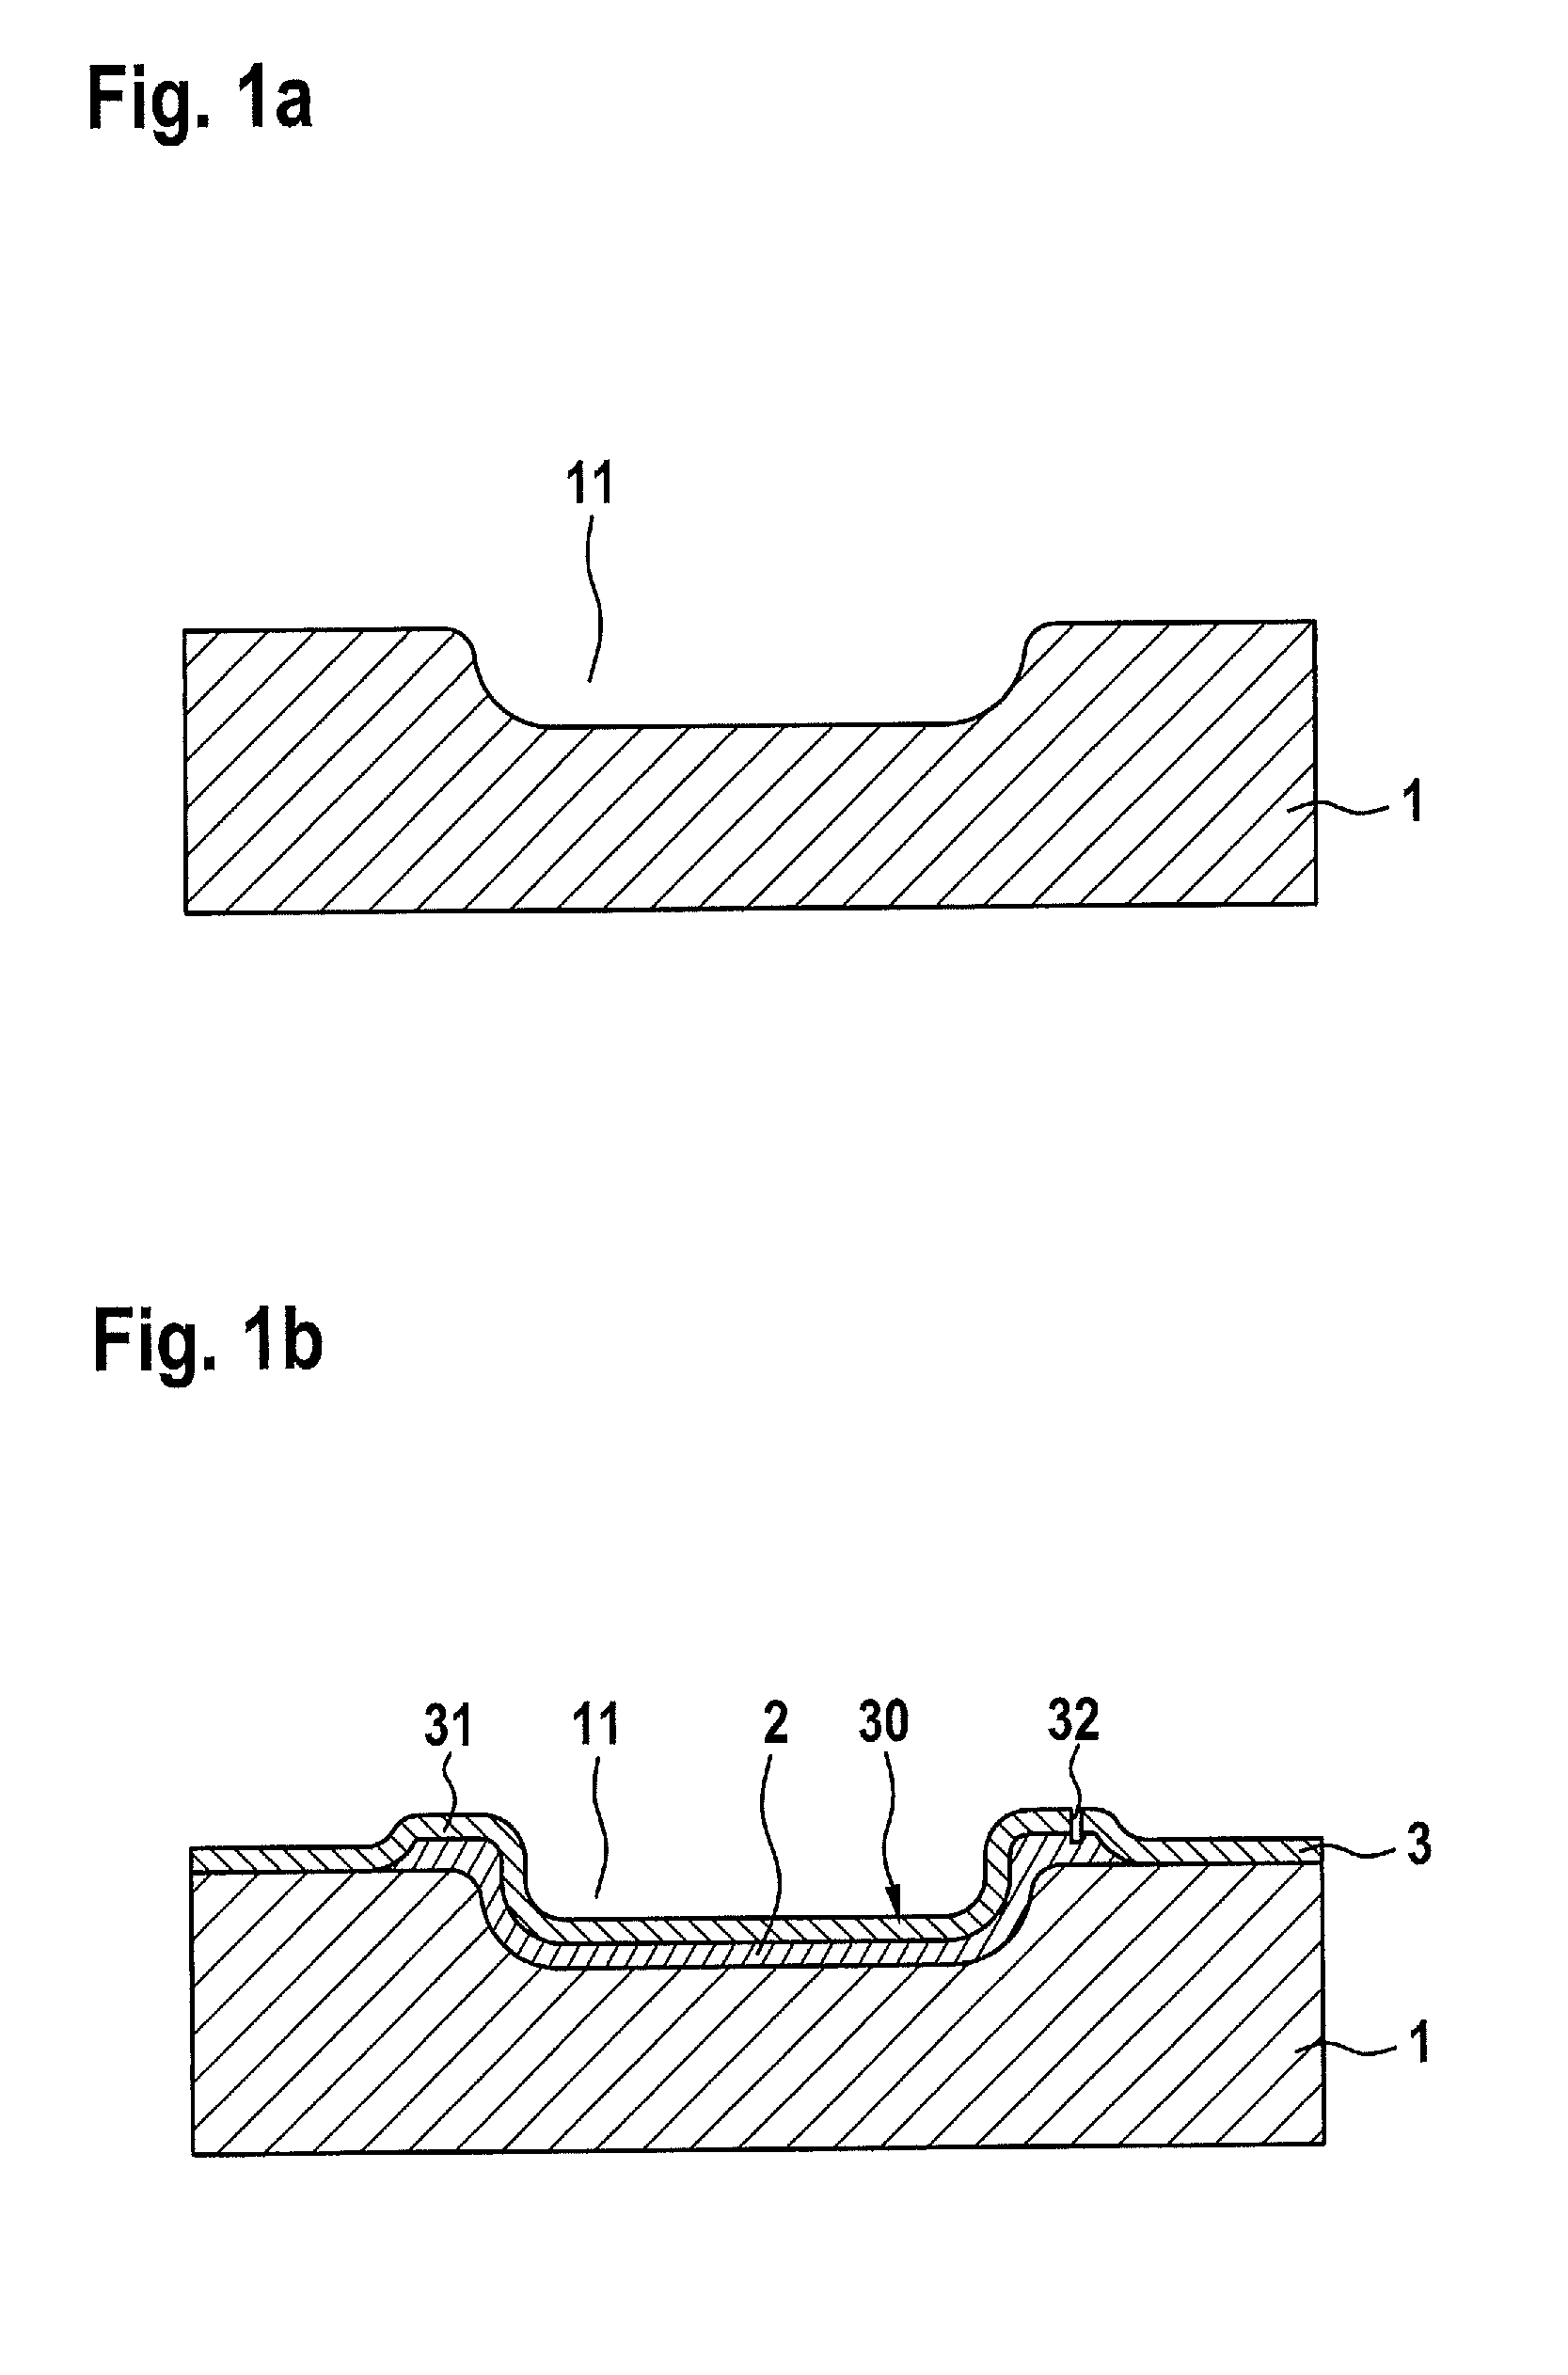 MEMS device having a microphone structure, and method for the production thereof